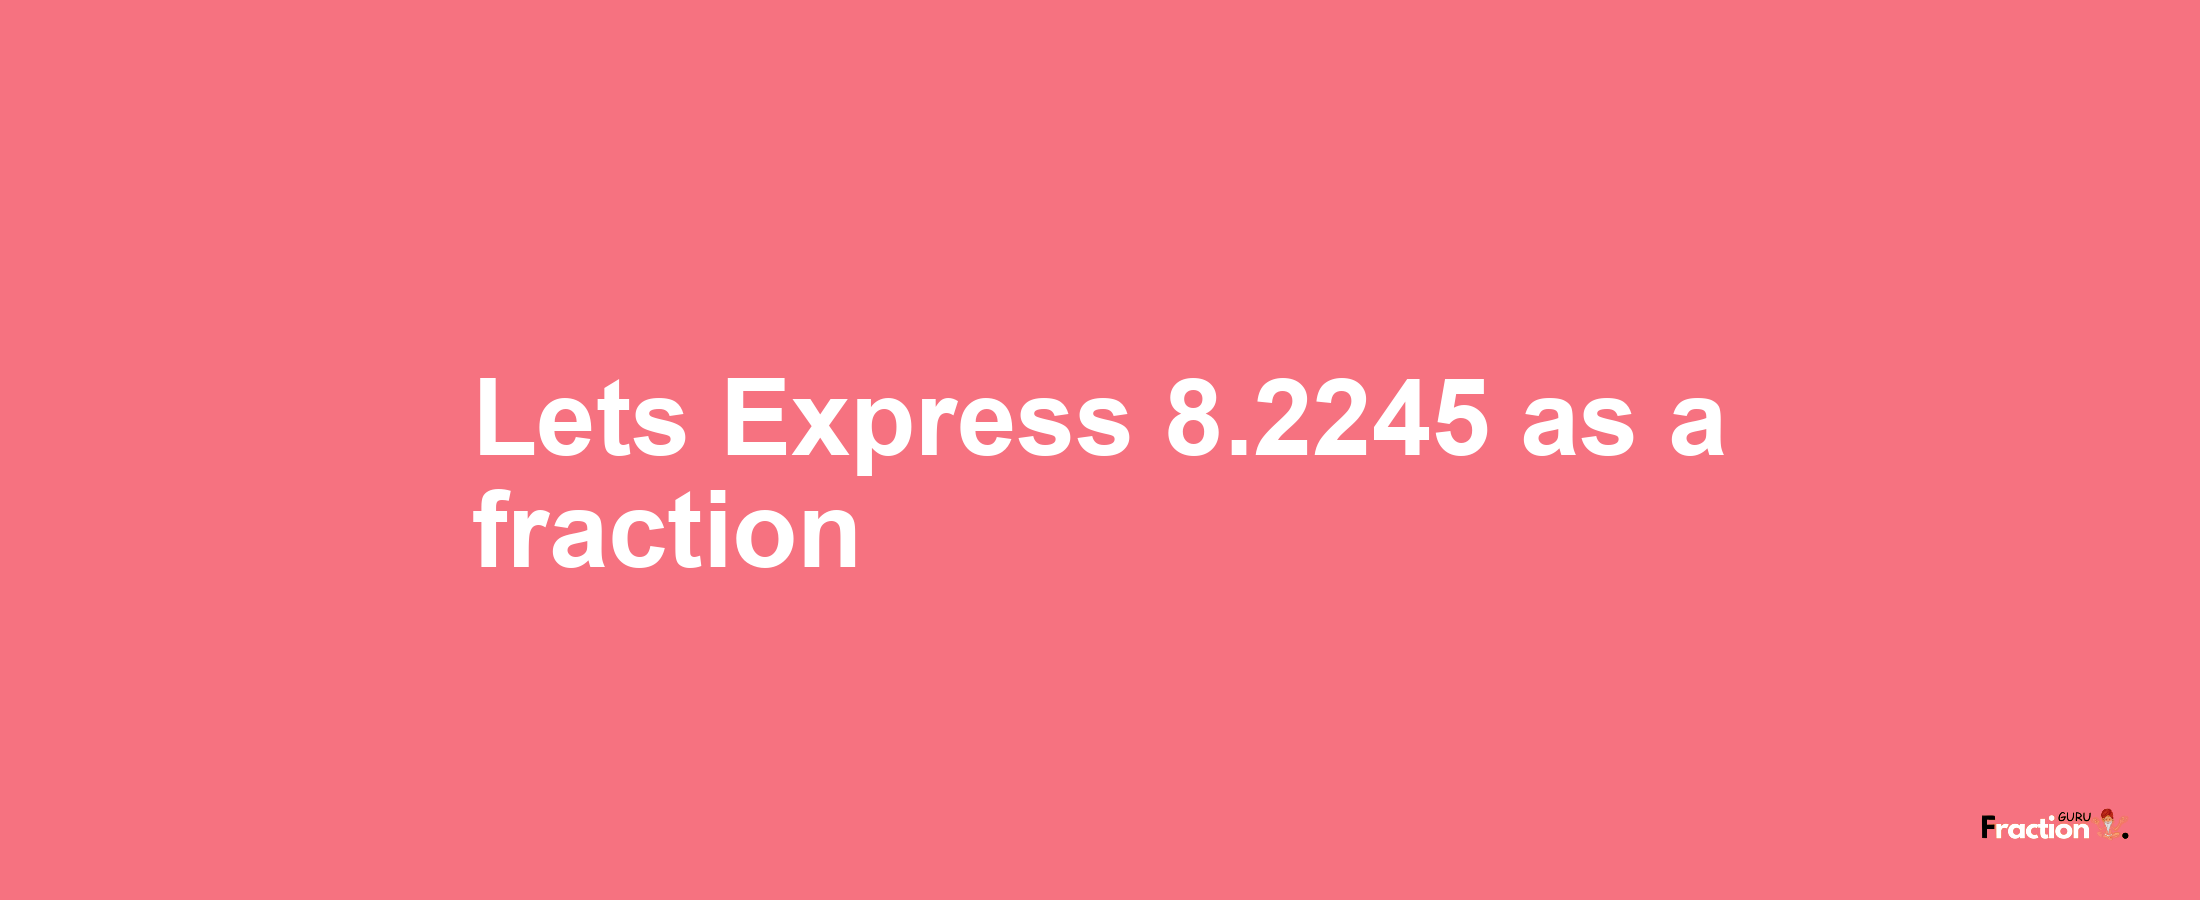 Lets Express 8.2245 as afraction